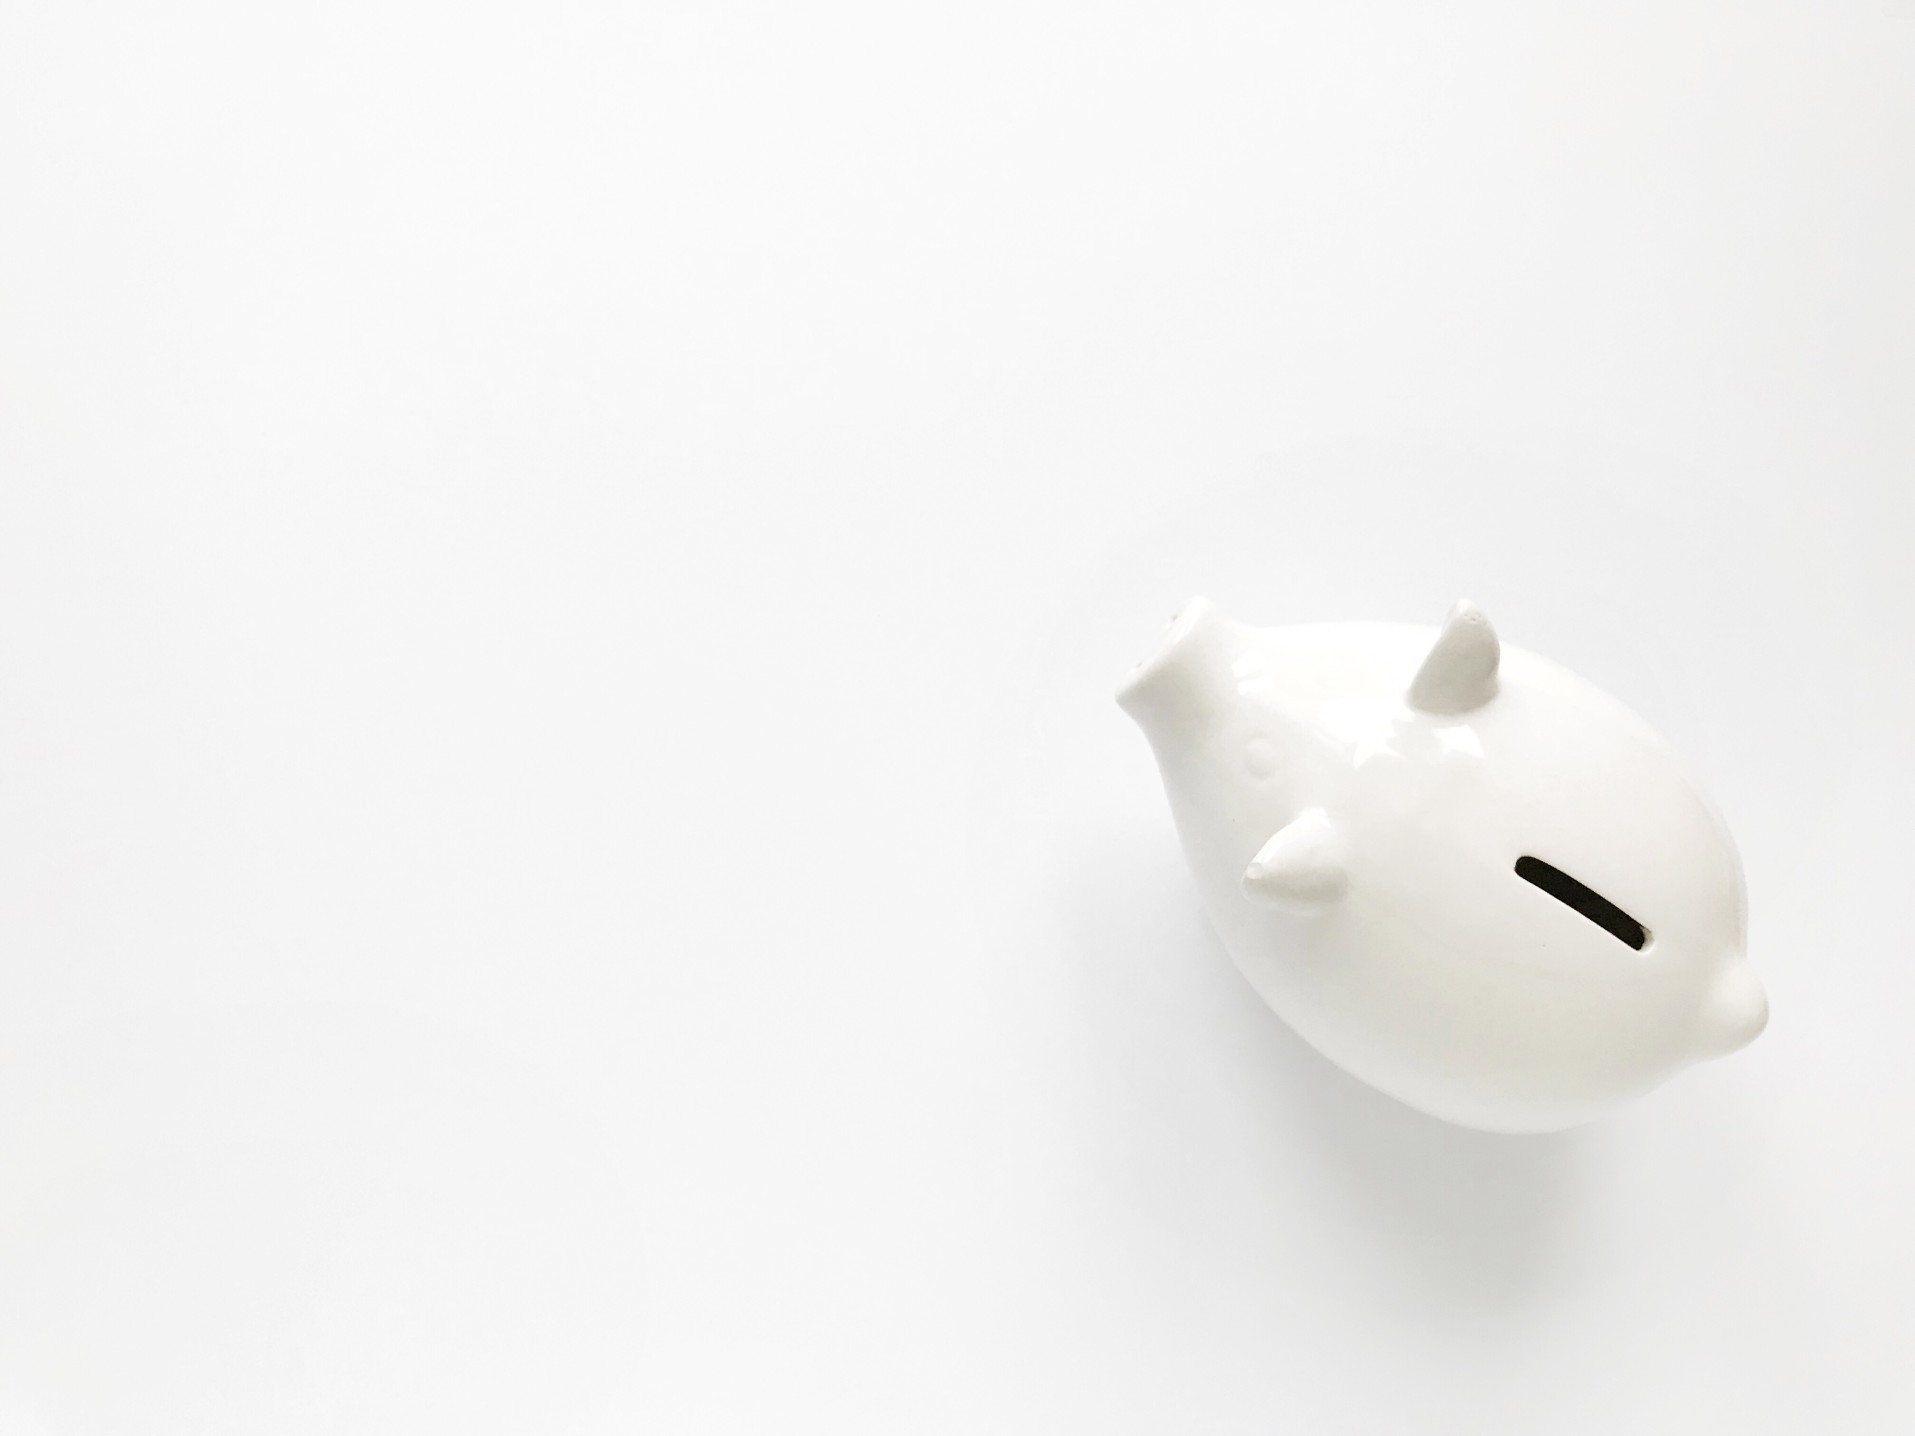 Ceramic Piggy Bank Laying On Flat Lay Desk Top Useful For Poor Or Failing Economy Concept Personal T20 Orw8ae